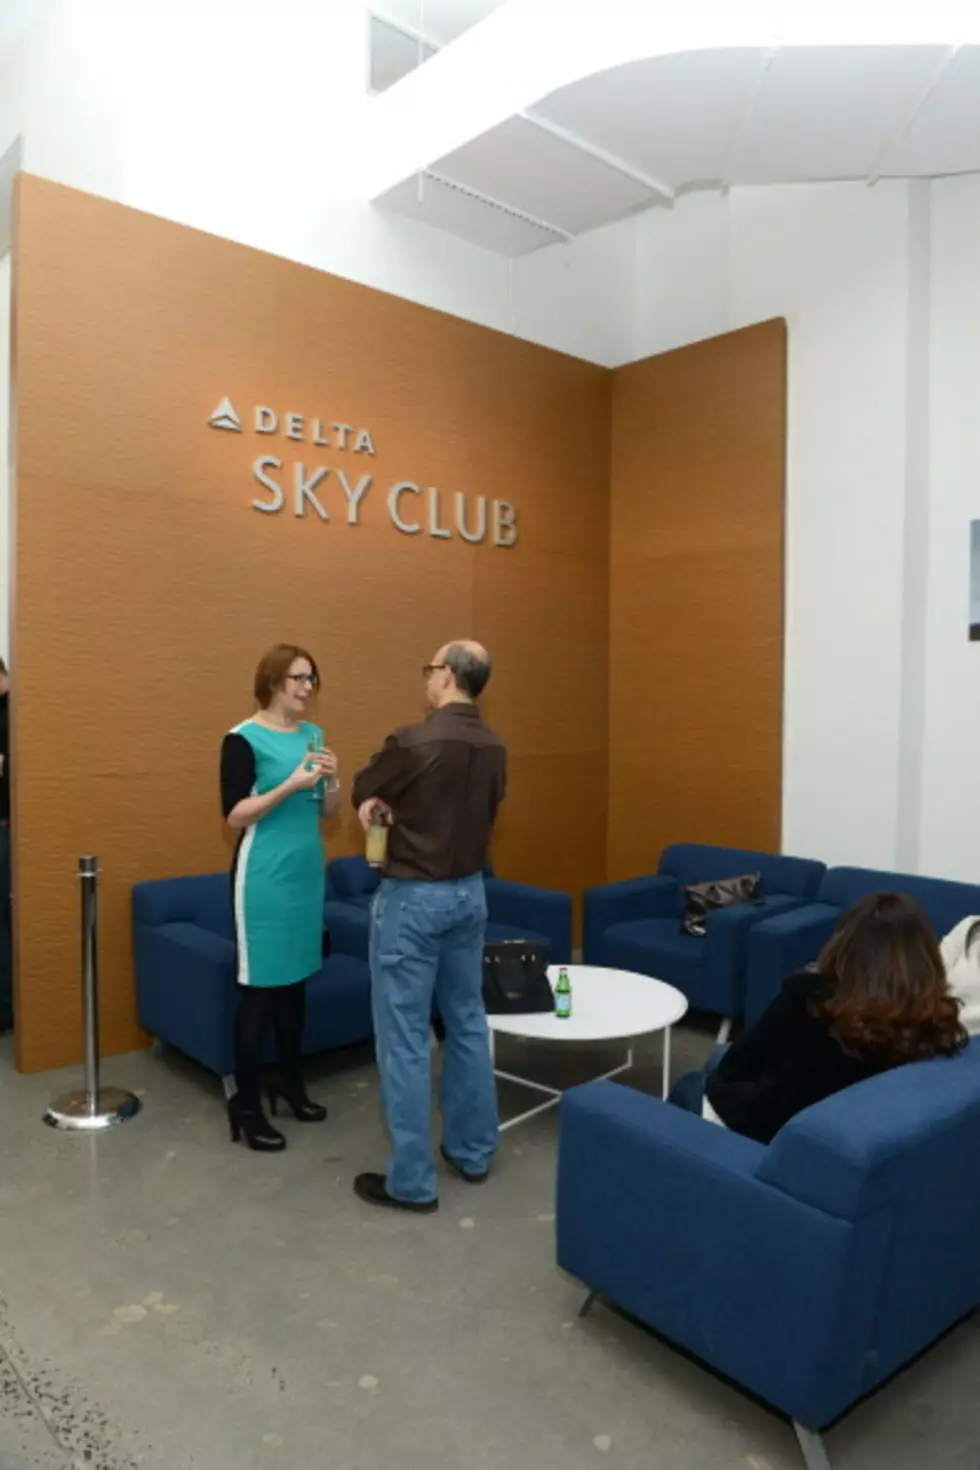 Is The Delta Sky Club Worth The Money? It Depends…